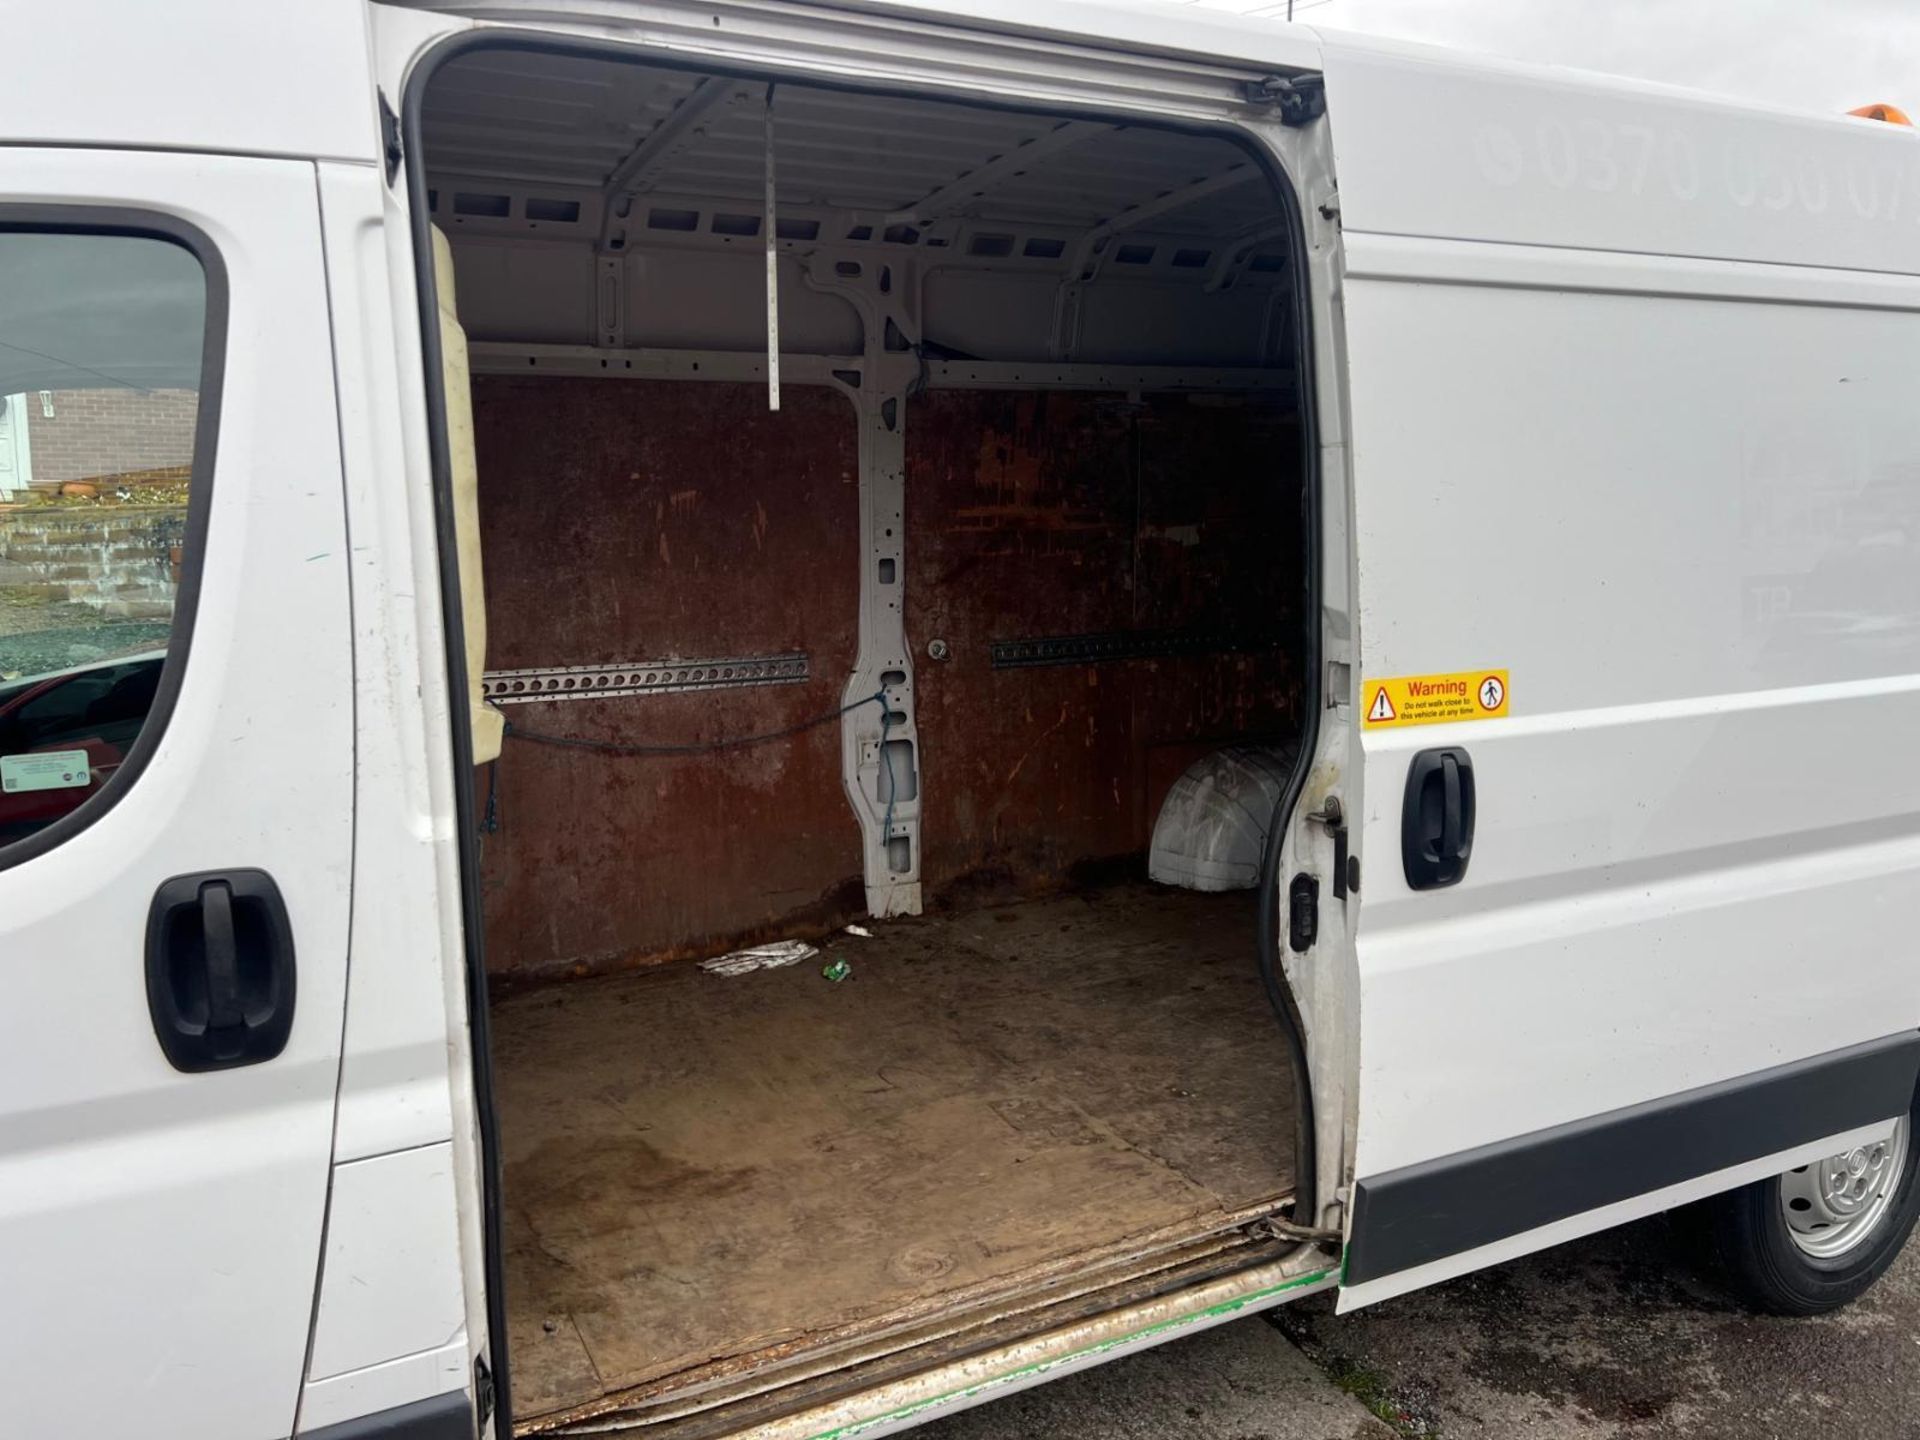 2017 FIAT DUCATO LWB L3 H2 PANEL VAN READY FOR ACTION! - Image 8 of 14